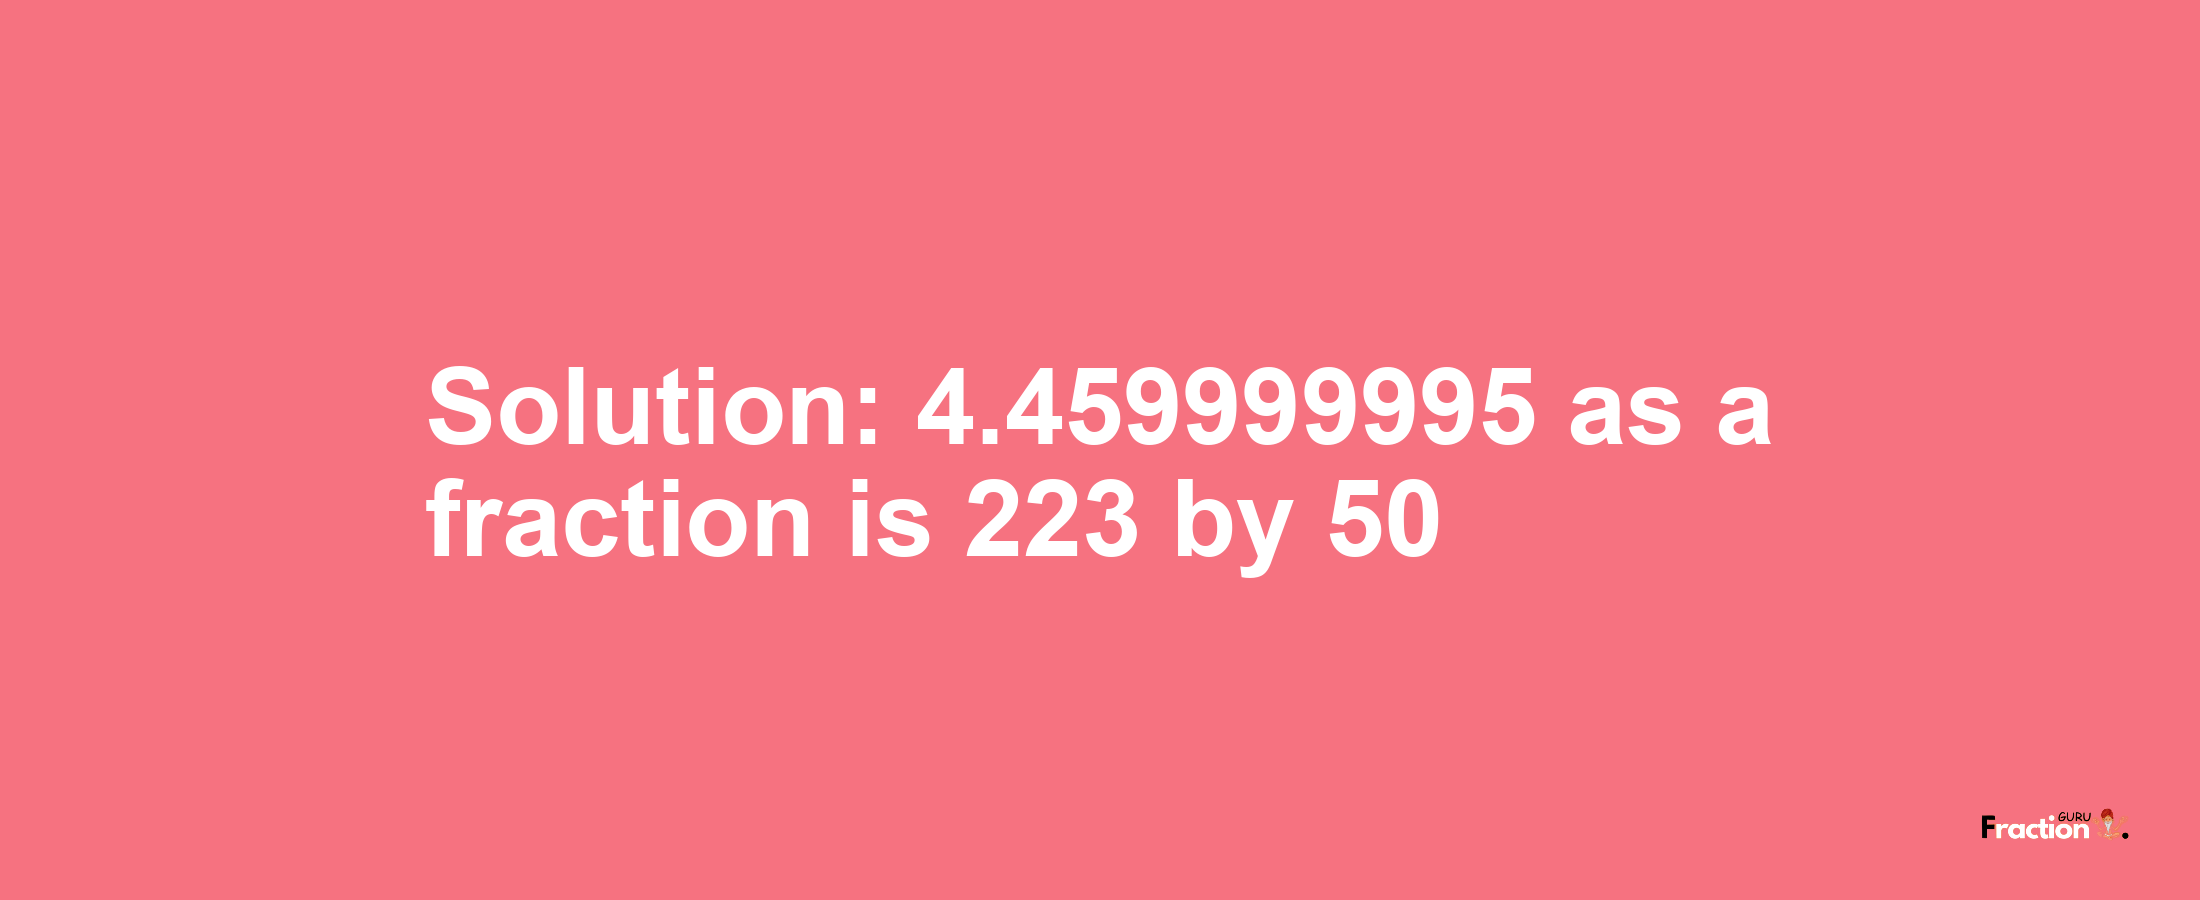 Solution:4.459999995 as a fraction is 223/50